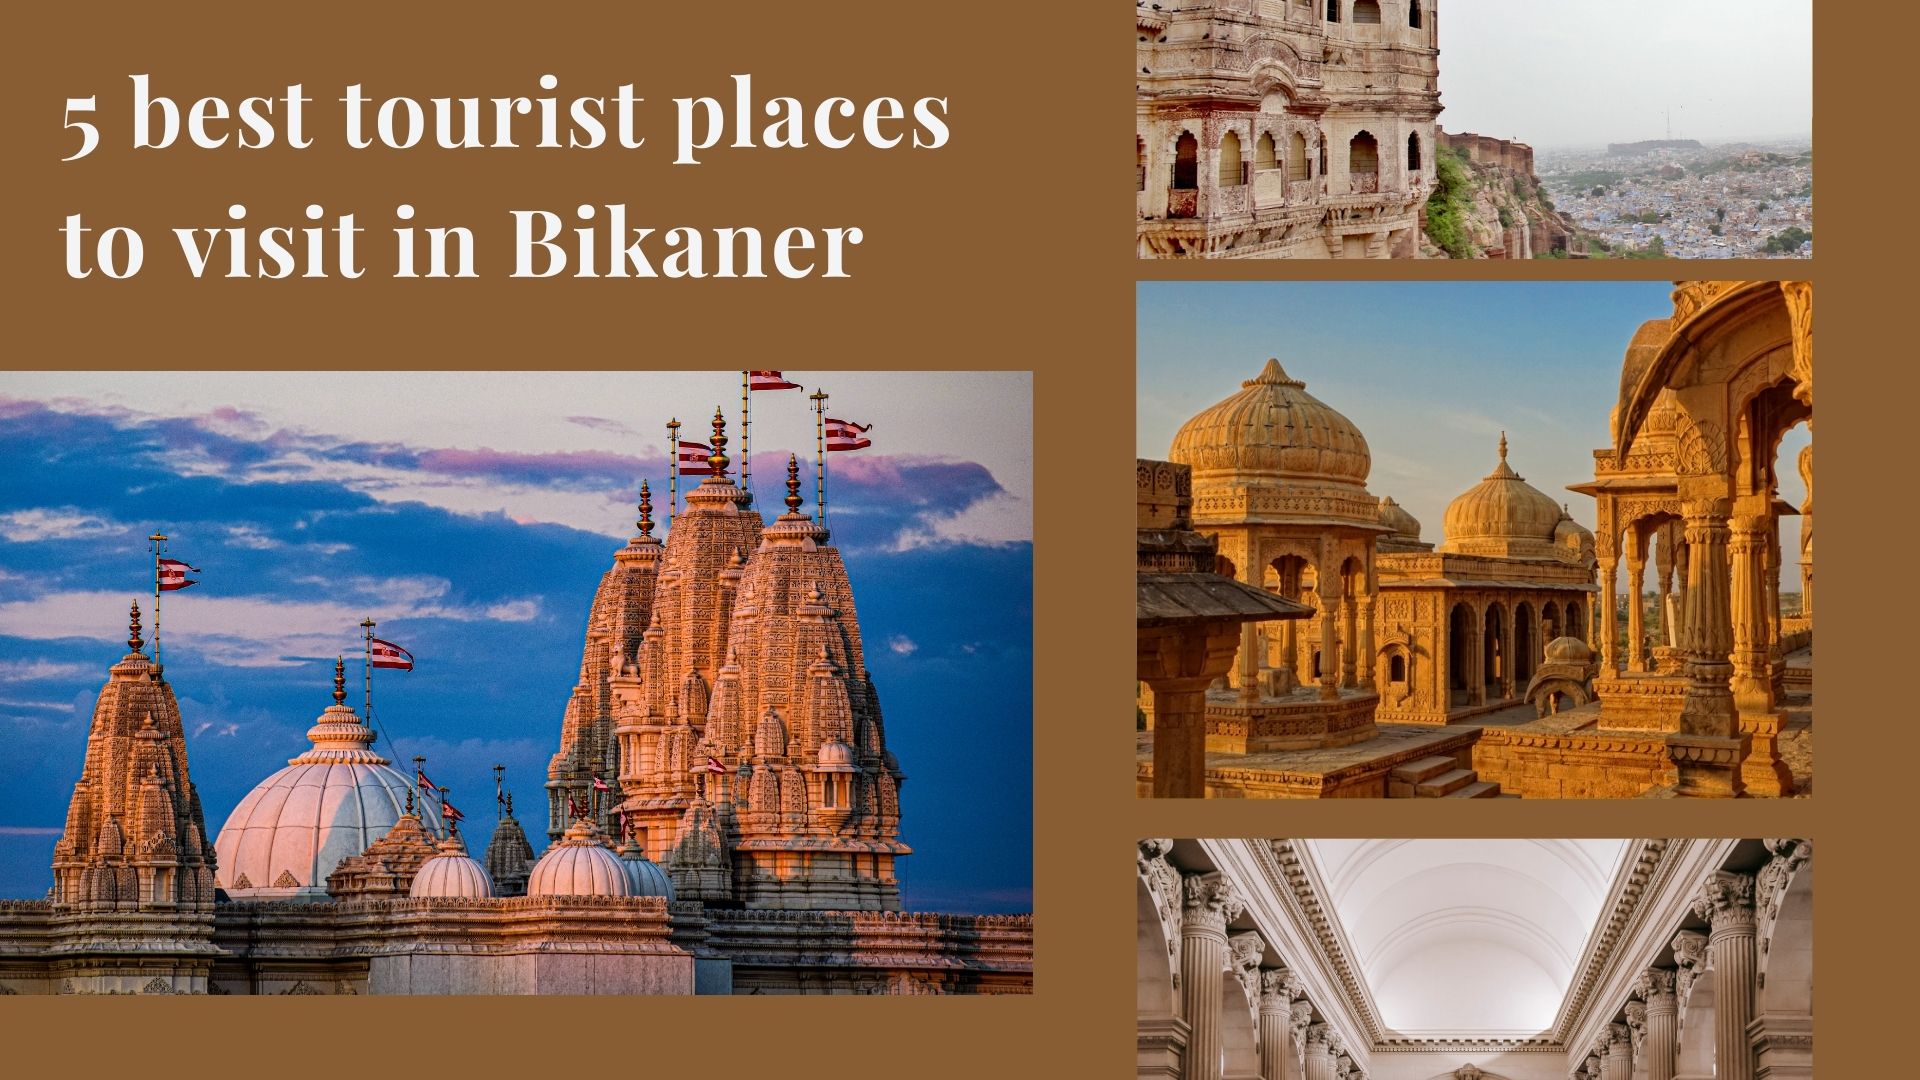 The best tourist places to visit in bikaner